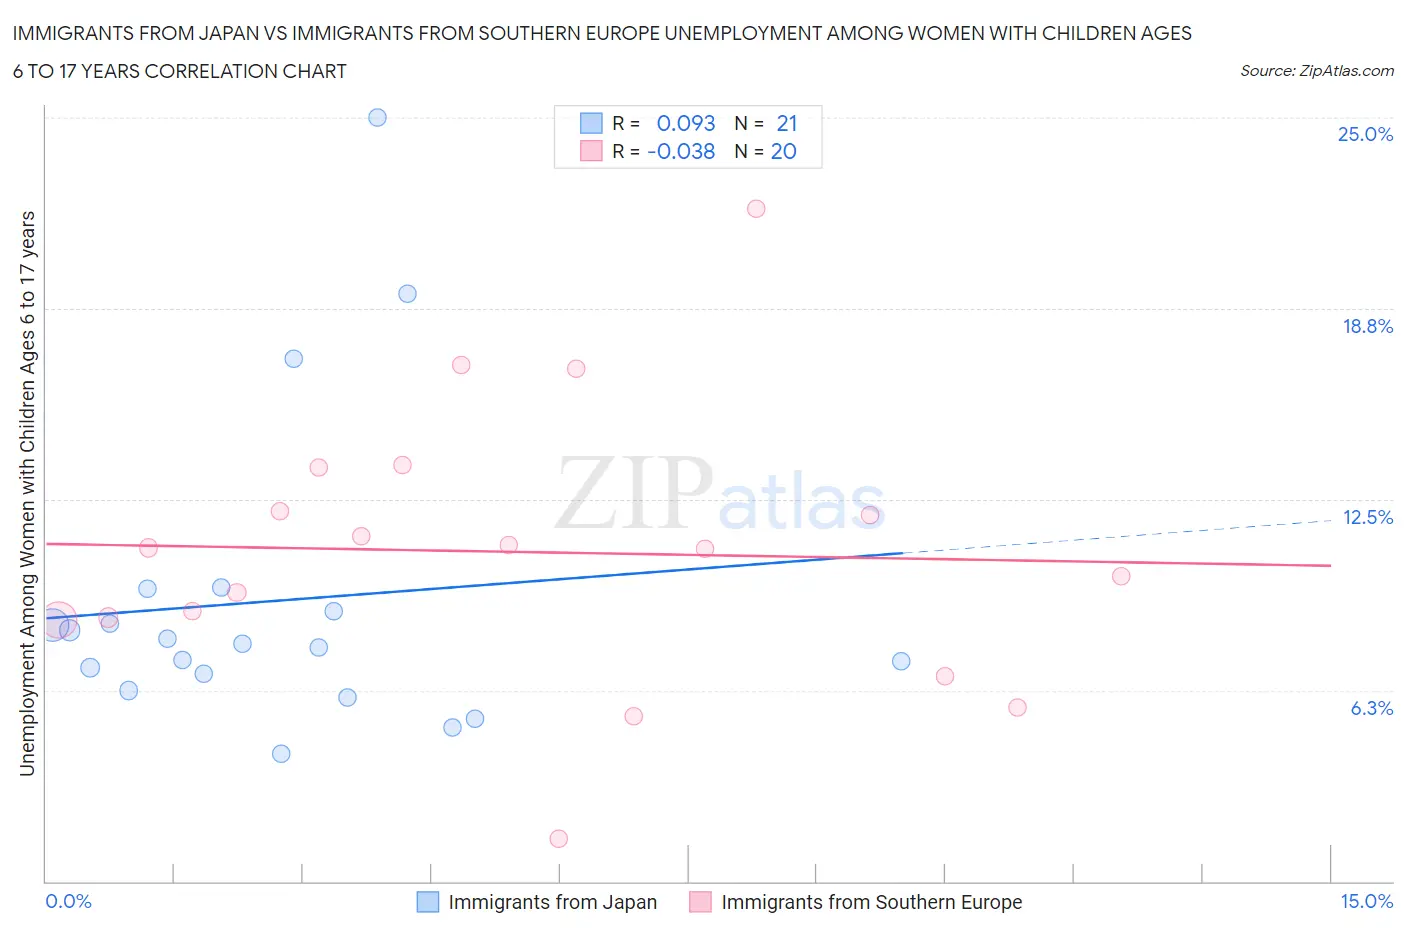 Immigrants from Japan vs Immigrants from Southern Europe Unemployment Among Women with Children Ages 6 to 17 years